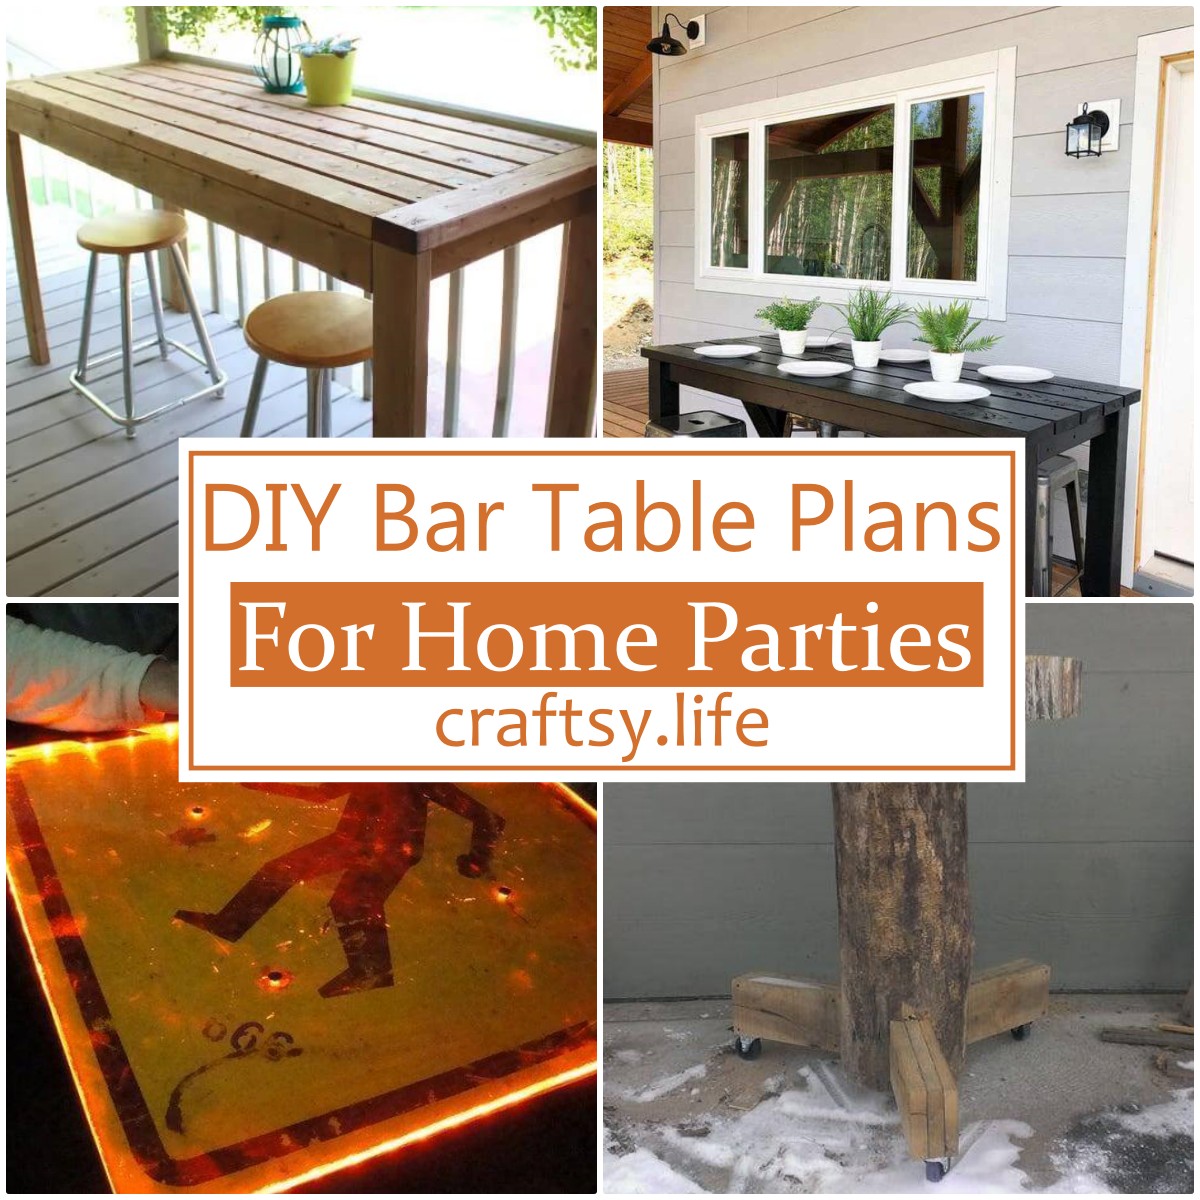 DIY Bar Table Plans For Home Parties